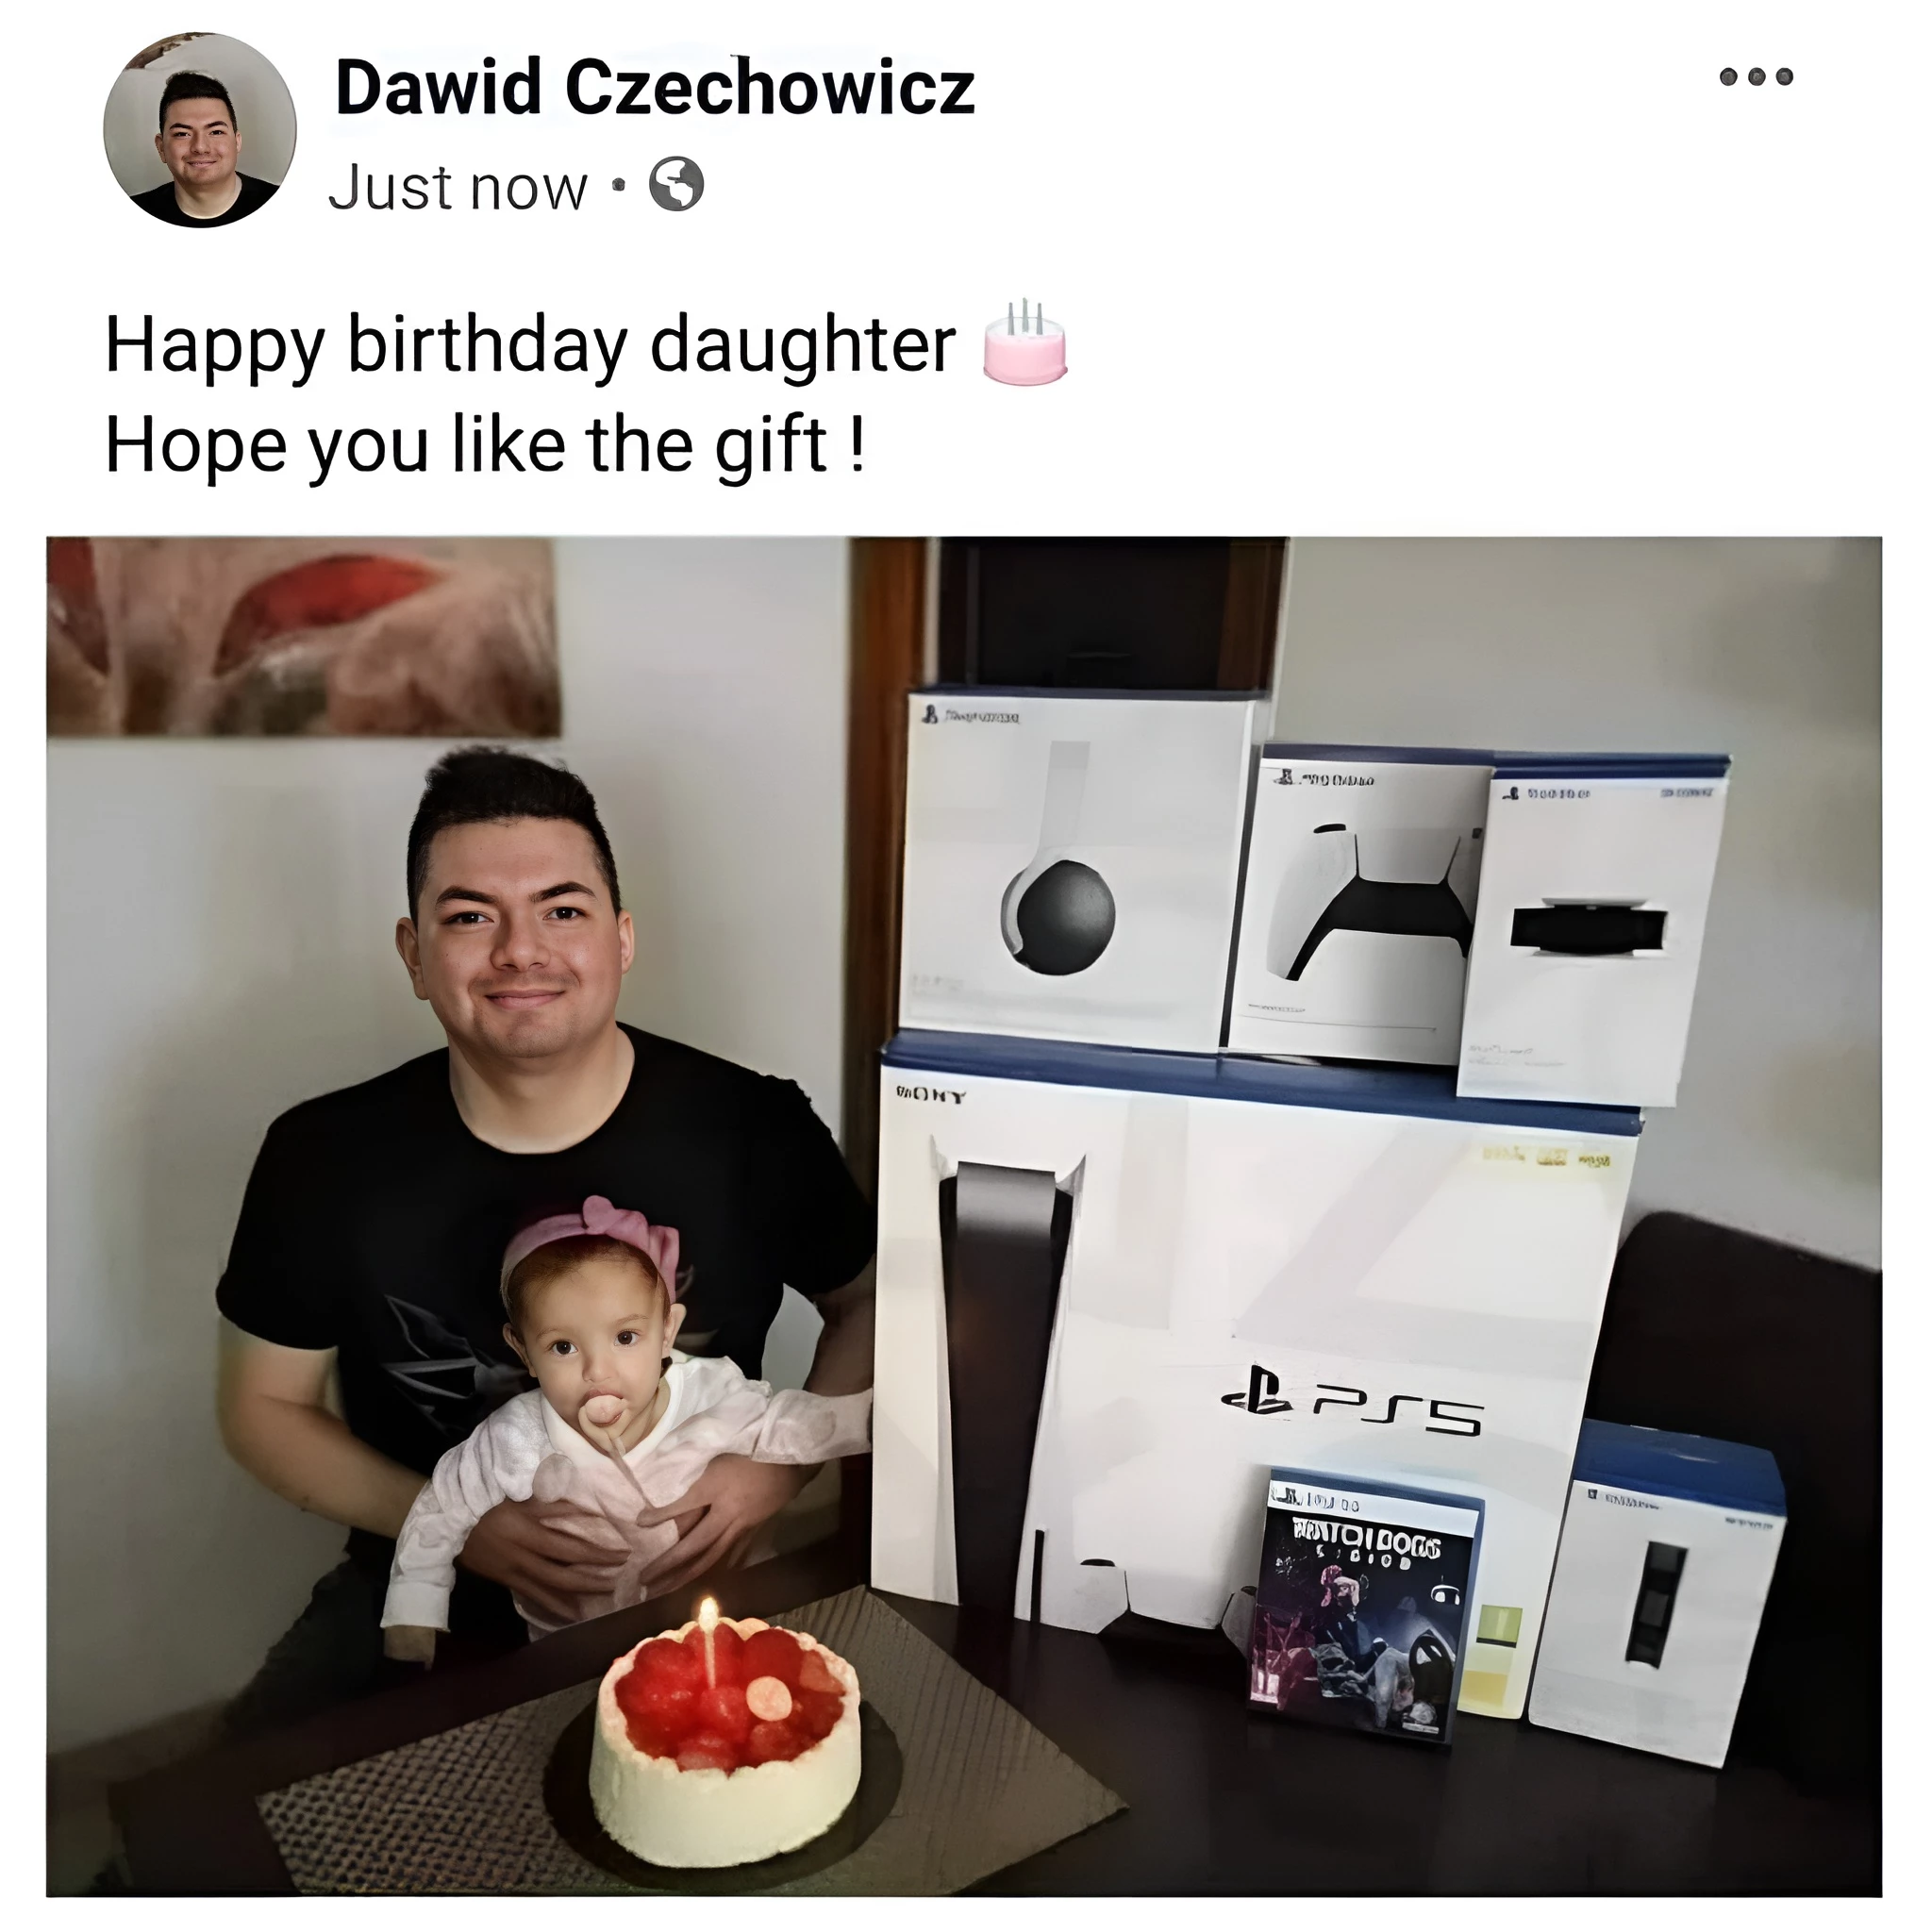 Ah Yes, A Present For His Daughter…